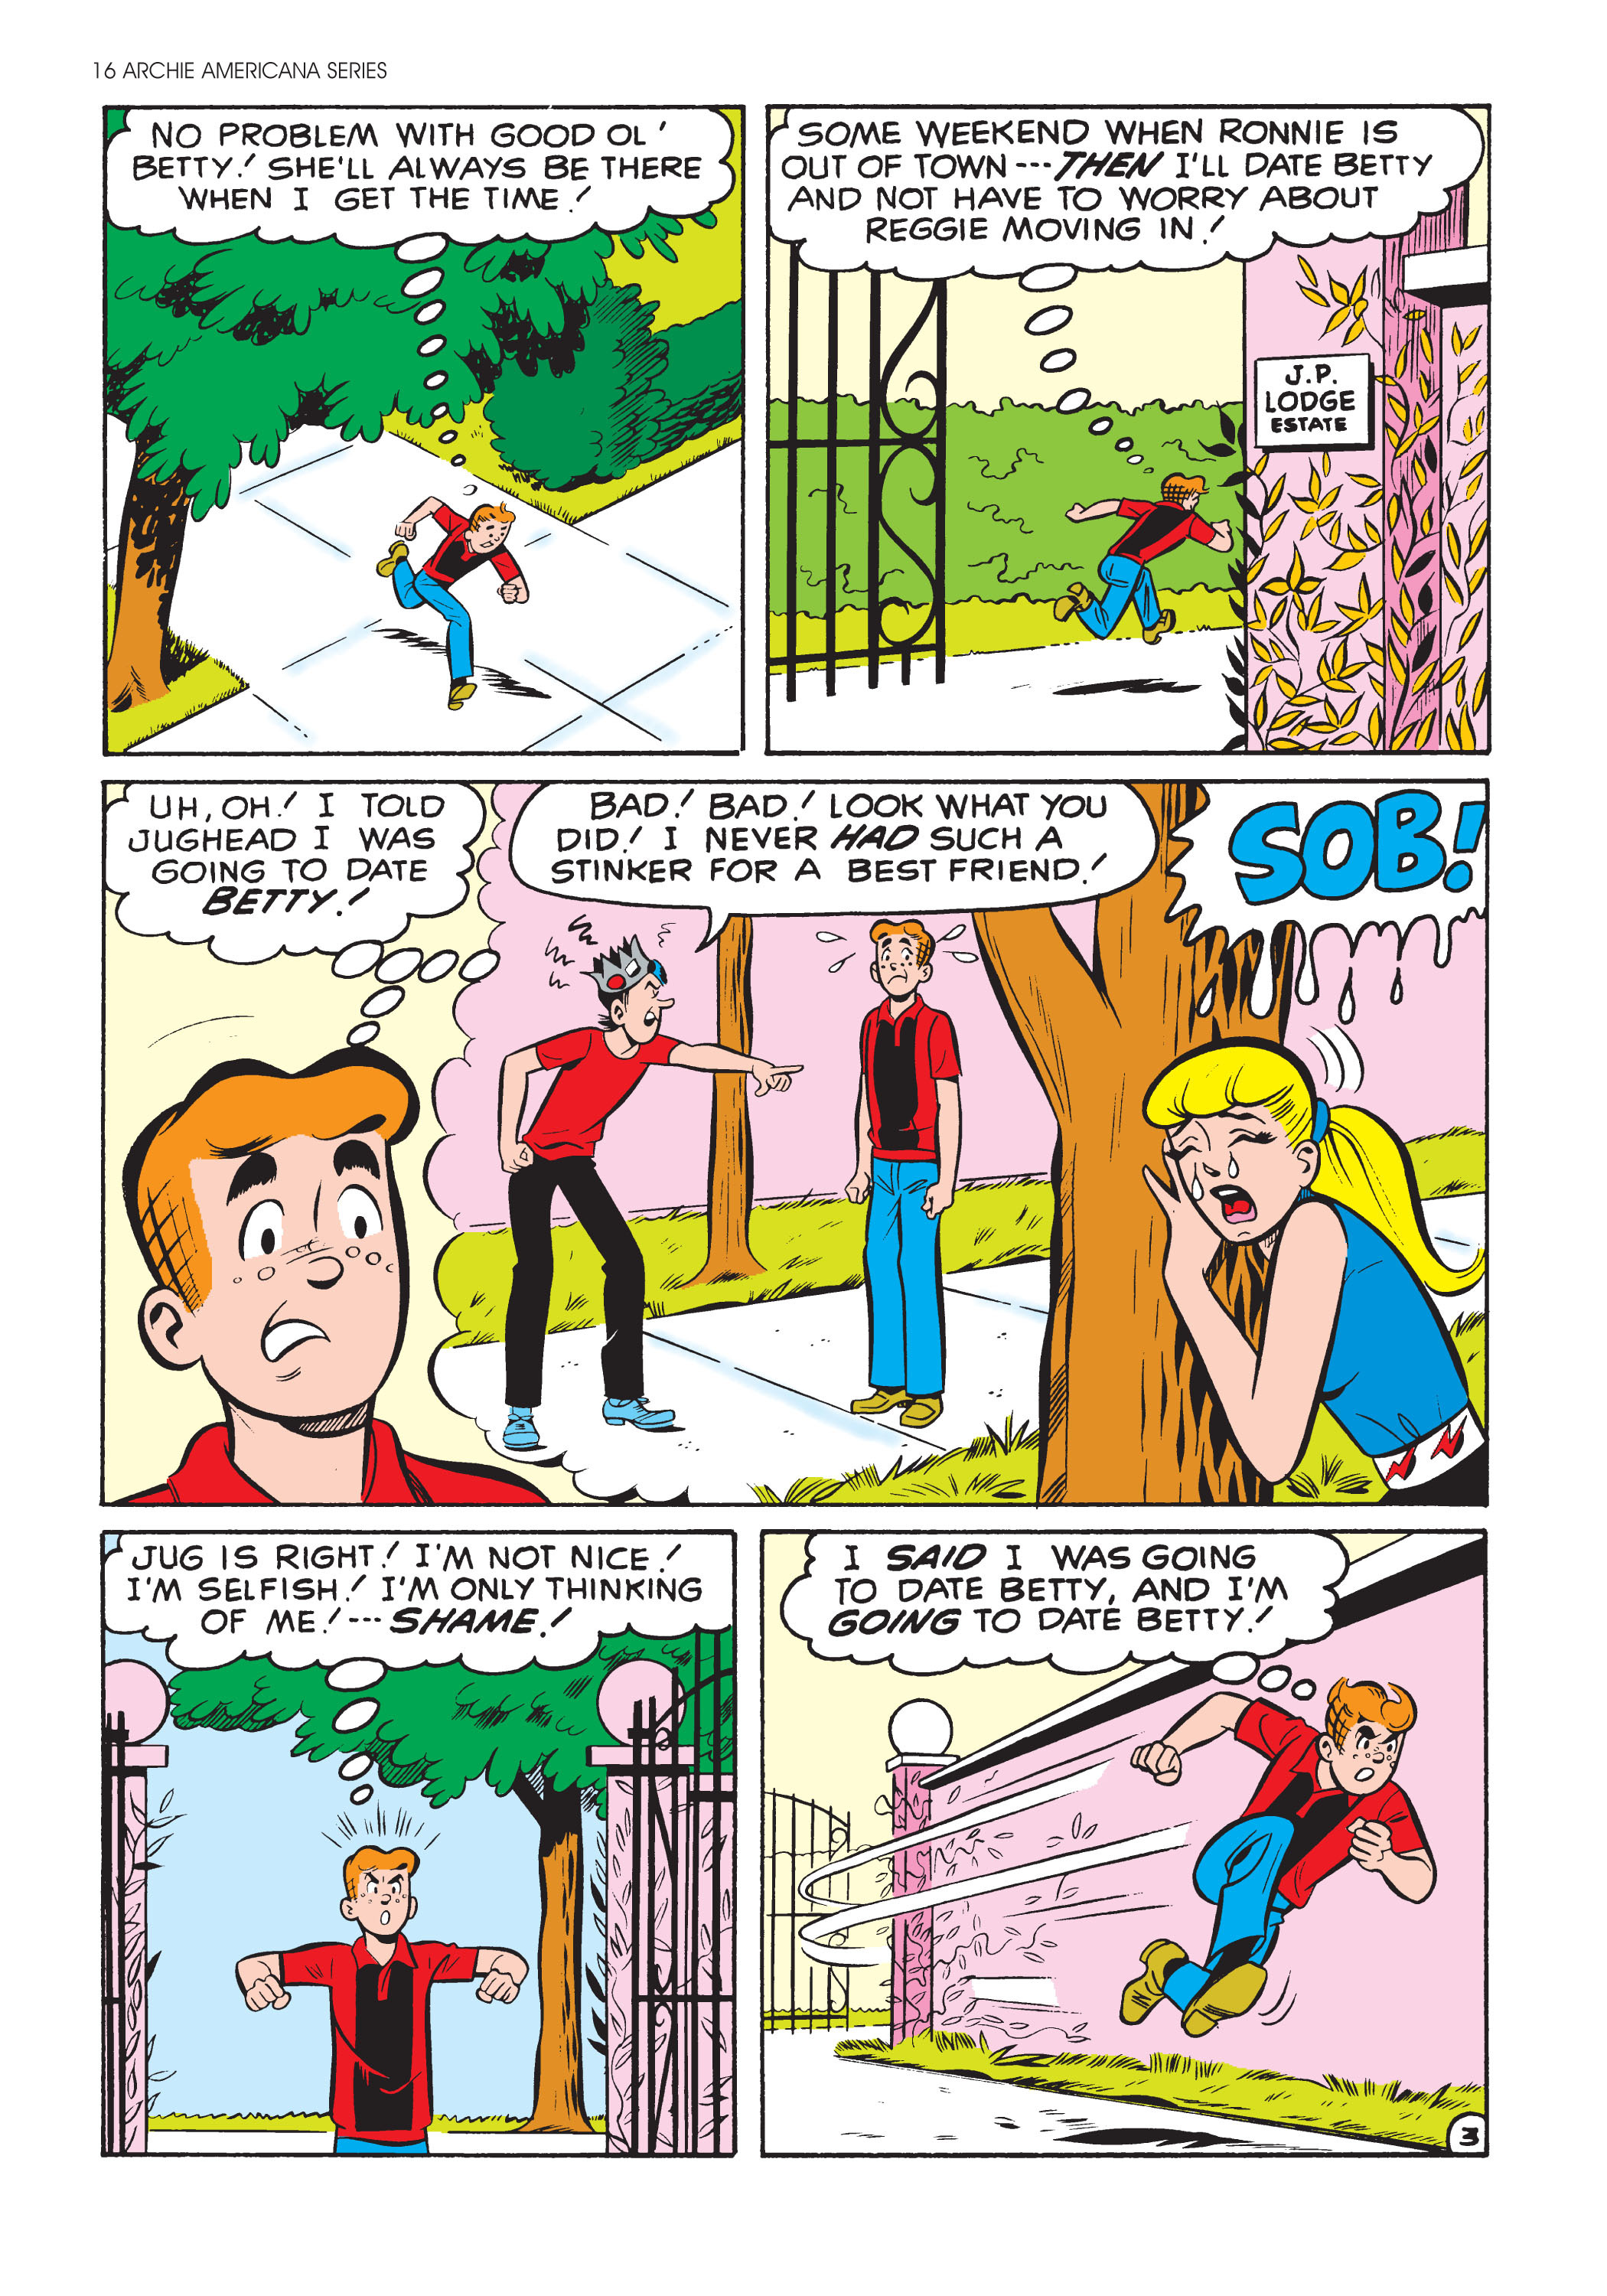 Read online Archie Americana Series comic -  Issue # TPB 4 - 18